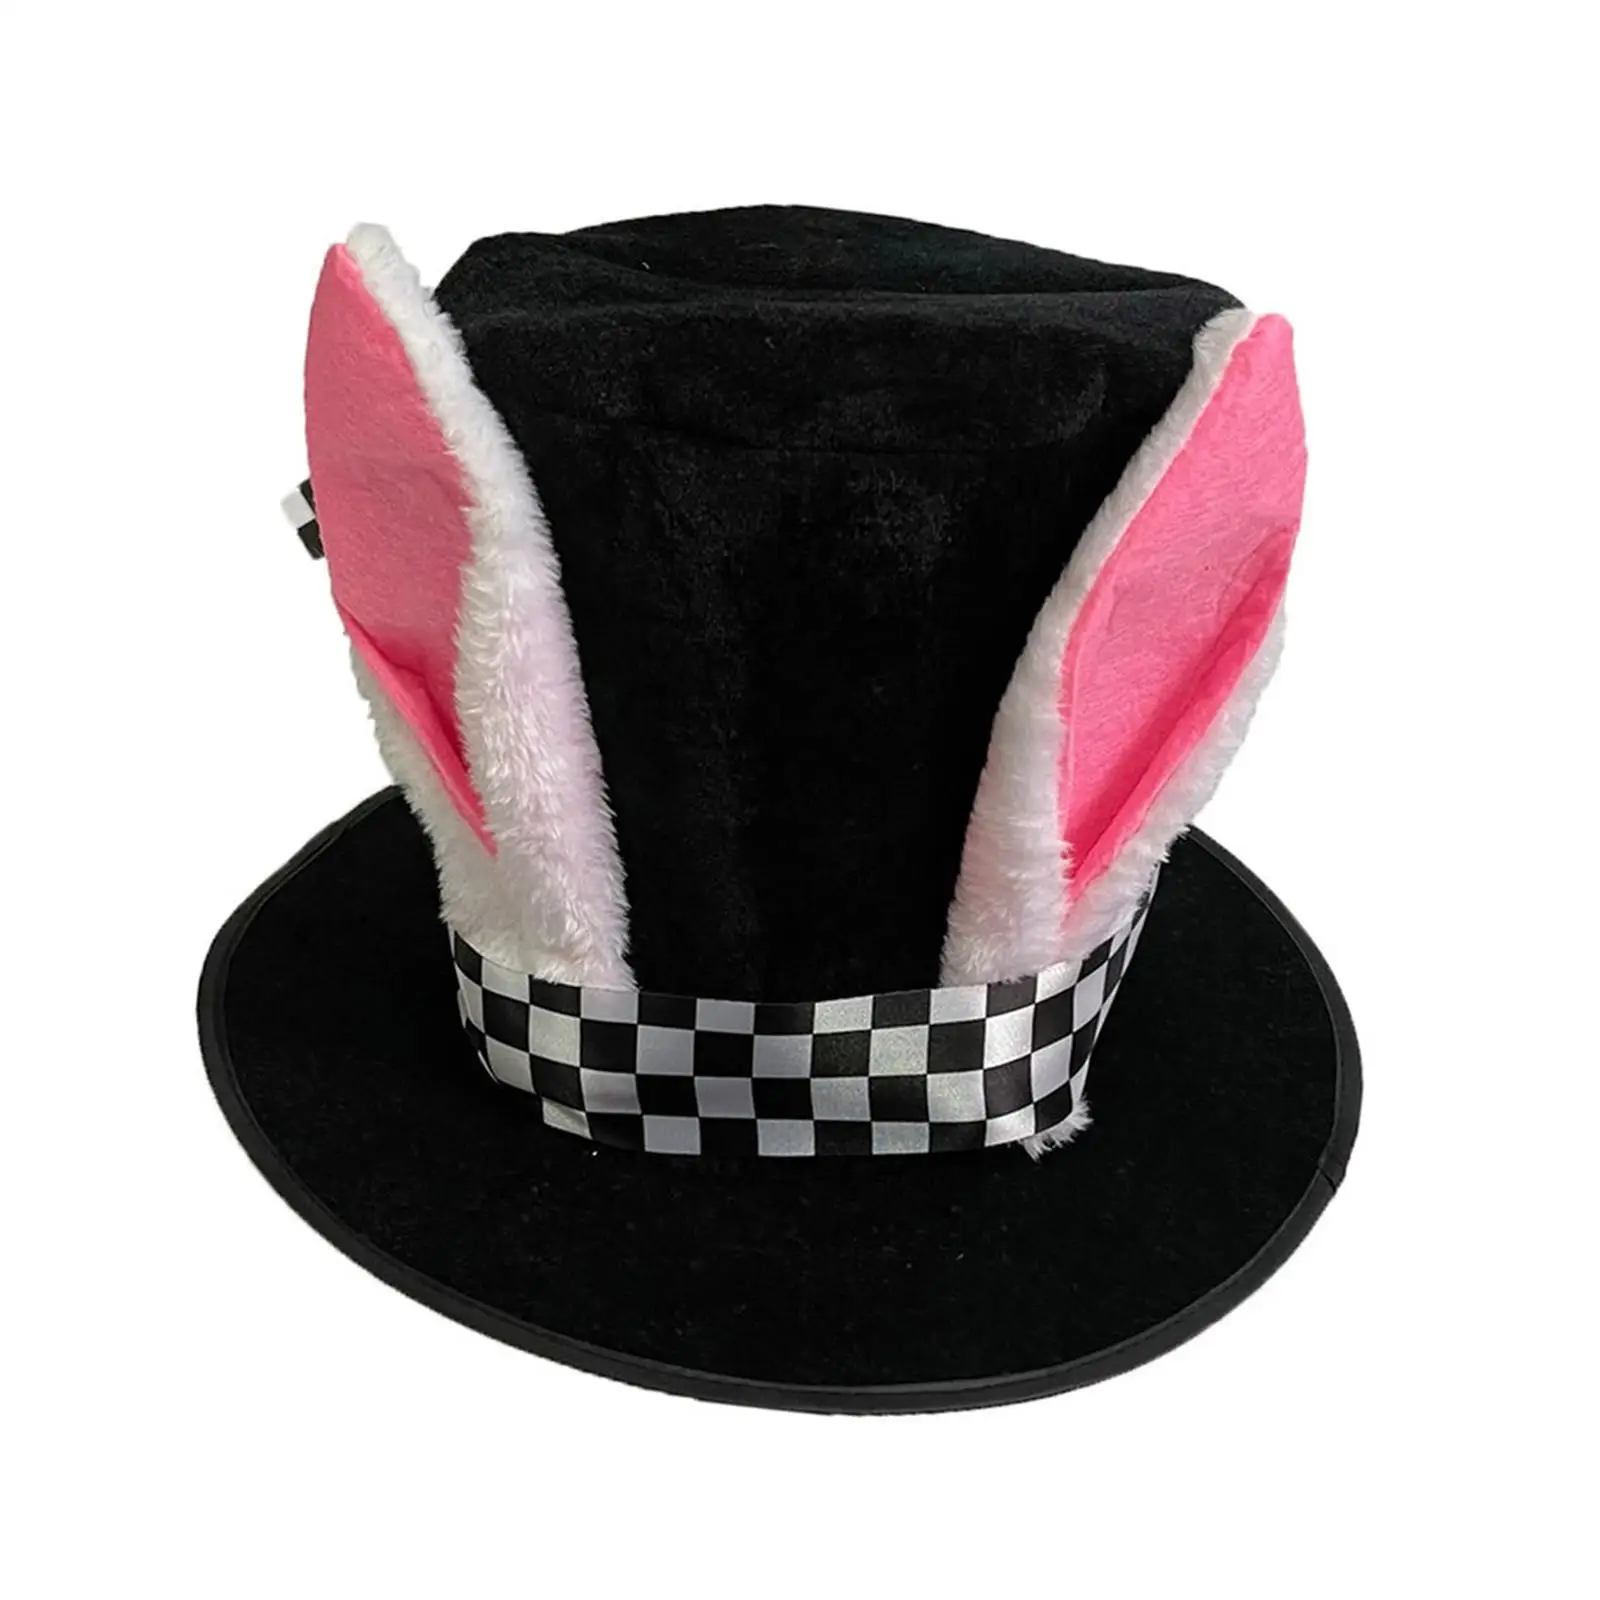 Bunny Ear Top Hat Rabbits Ears Topper Easter Rabbit Costume for Festival Holiday